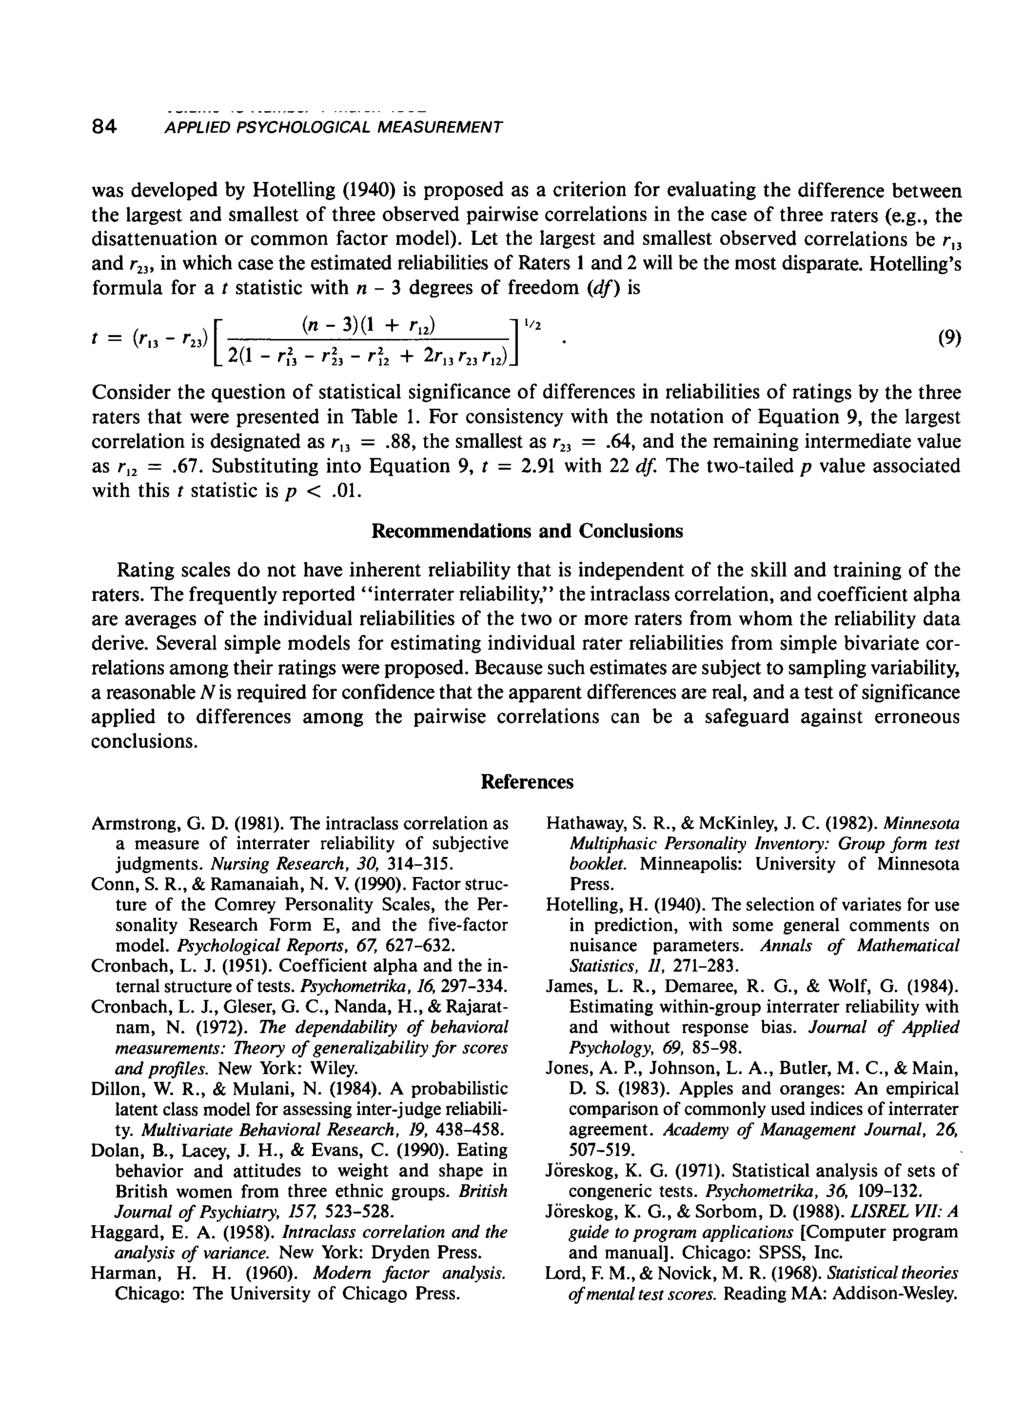 84 was developed by Hotelling (1940) is proposed as a criterion for evaluating the difference between the largest and smallest of three observed pairwise correlations in the case of three raters (e.g., the disattenuation or common factor model).